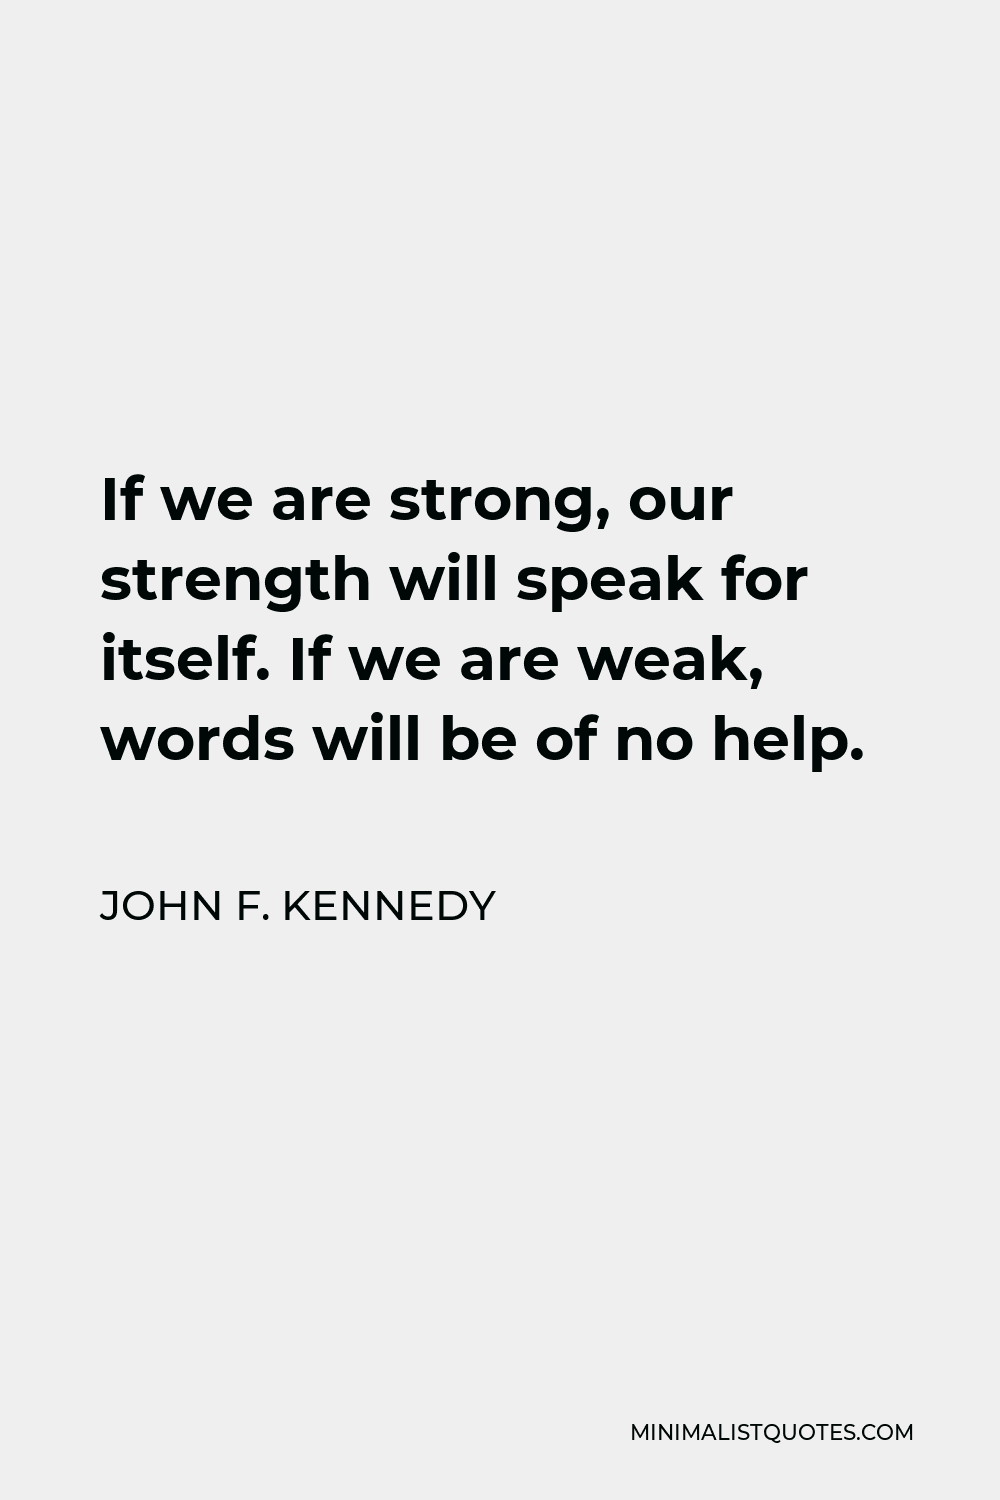 John F. Kennedy Quote - If we are strong, our strength will speak for itself. If we are weak, words will be of no help.